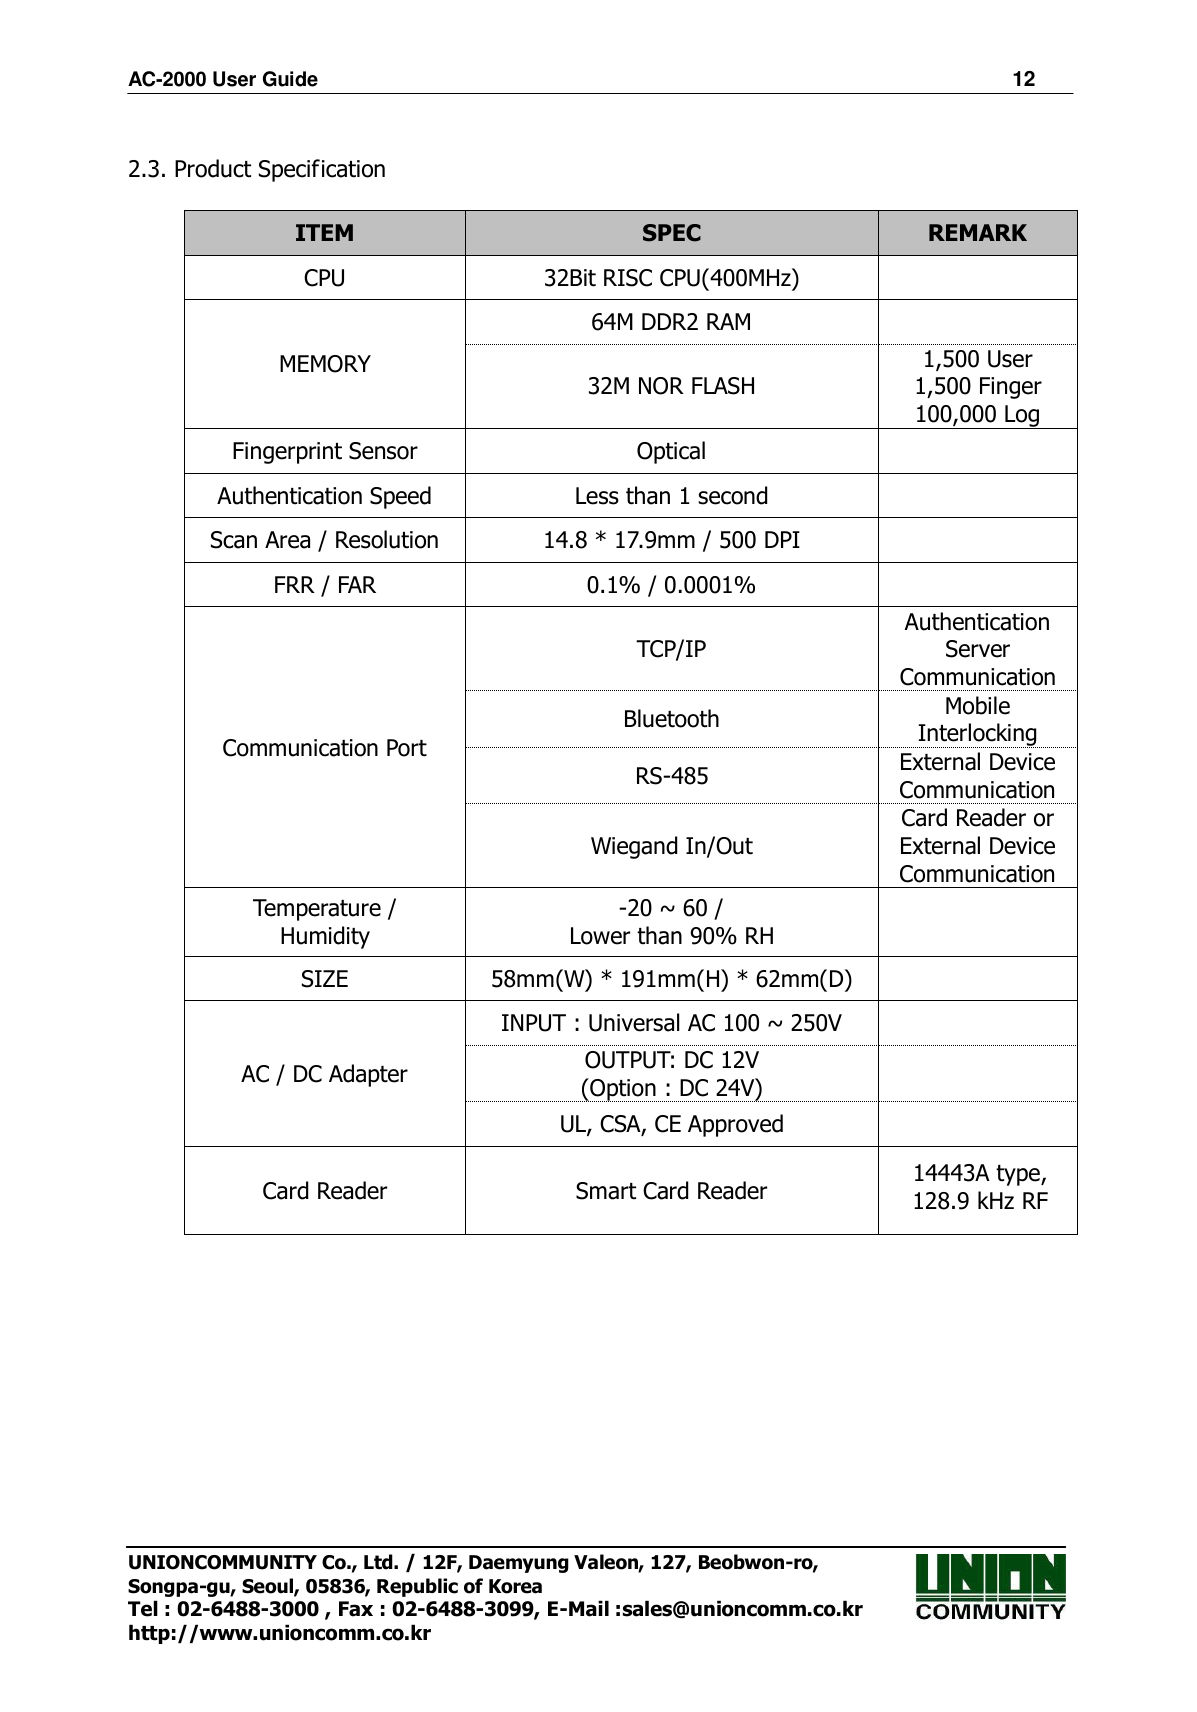 AC-2000 User Guide 12 UNIONCOMMUNITY Co., Ltd. / 12F, Daemyung Valeon, 127, Beobwon-ro, Songpa-gu, Seoul, 05836, Republic of Korea Tel : 02-6488-3000 , Fax : 02-6488-3099, E-Mail :sales@unioncomm.co.kr http://www.unioncomm.co.kr 2.3. Product Specification ITEM SPEC REMARK CPU 32Bit RISC CPU(400MHz) MEMORY 64M DDR2 RAM 32M NOR FLASH 1,500 User 1,500 Finger 100,000 Log Fingerprint Sensor Optical Authentication Speed Less than 1 second Scan Area / Resolution 14.8 * 17.9mm / 500 DPI FRR / FAR 0.1% / 0.0001% Communication Port TCP/IP Authentication Server Communication Bluetooth Mobile Interlocking RS-485 External Device Communication Wiegand In/Out Card Reader or External Device Communication Temperature / Humidity -20 ~ 60 / Lower than 90% RH SIZE 58mm(W) * 191mm(H) * 62mm(D) AC / DC Adapter INPUT : Universal AC 100 ~ 250V OUTPUT: DC 12V (Option : DC 24V) UL, CSA, CE Approved Card Reader Smart Card Reader 14443A type,128.9 kHz RF